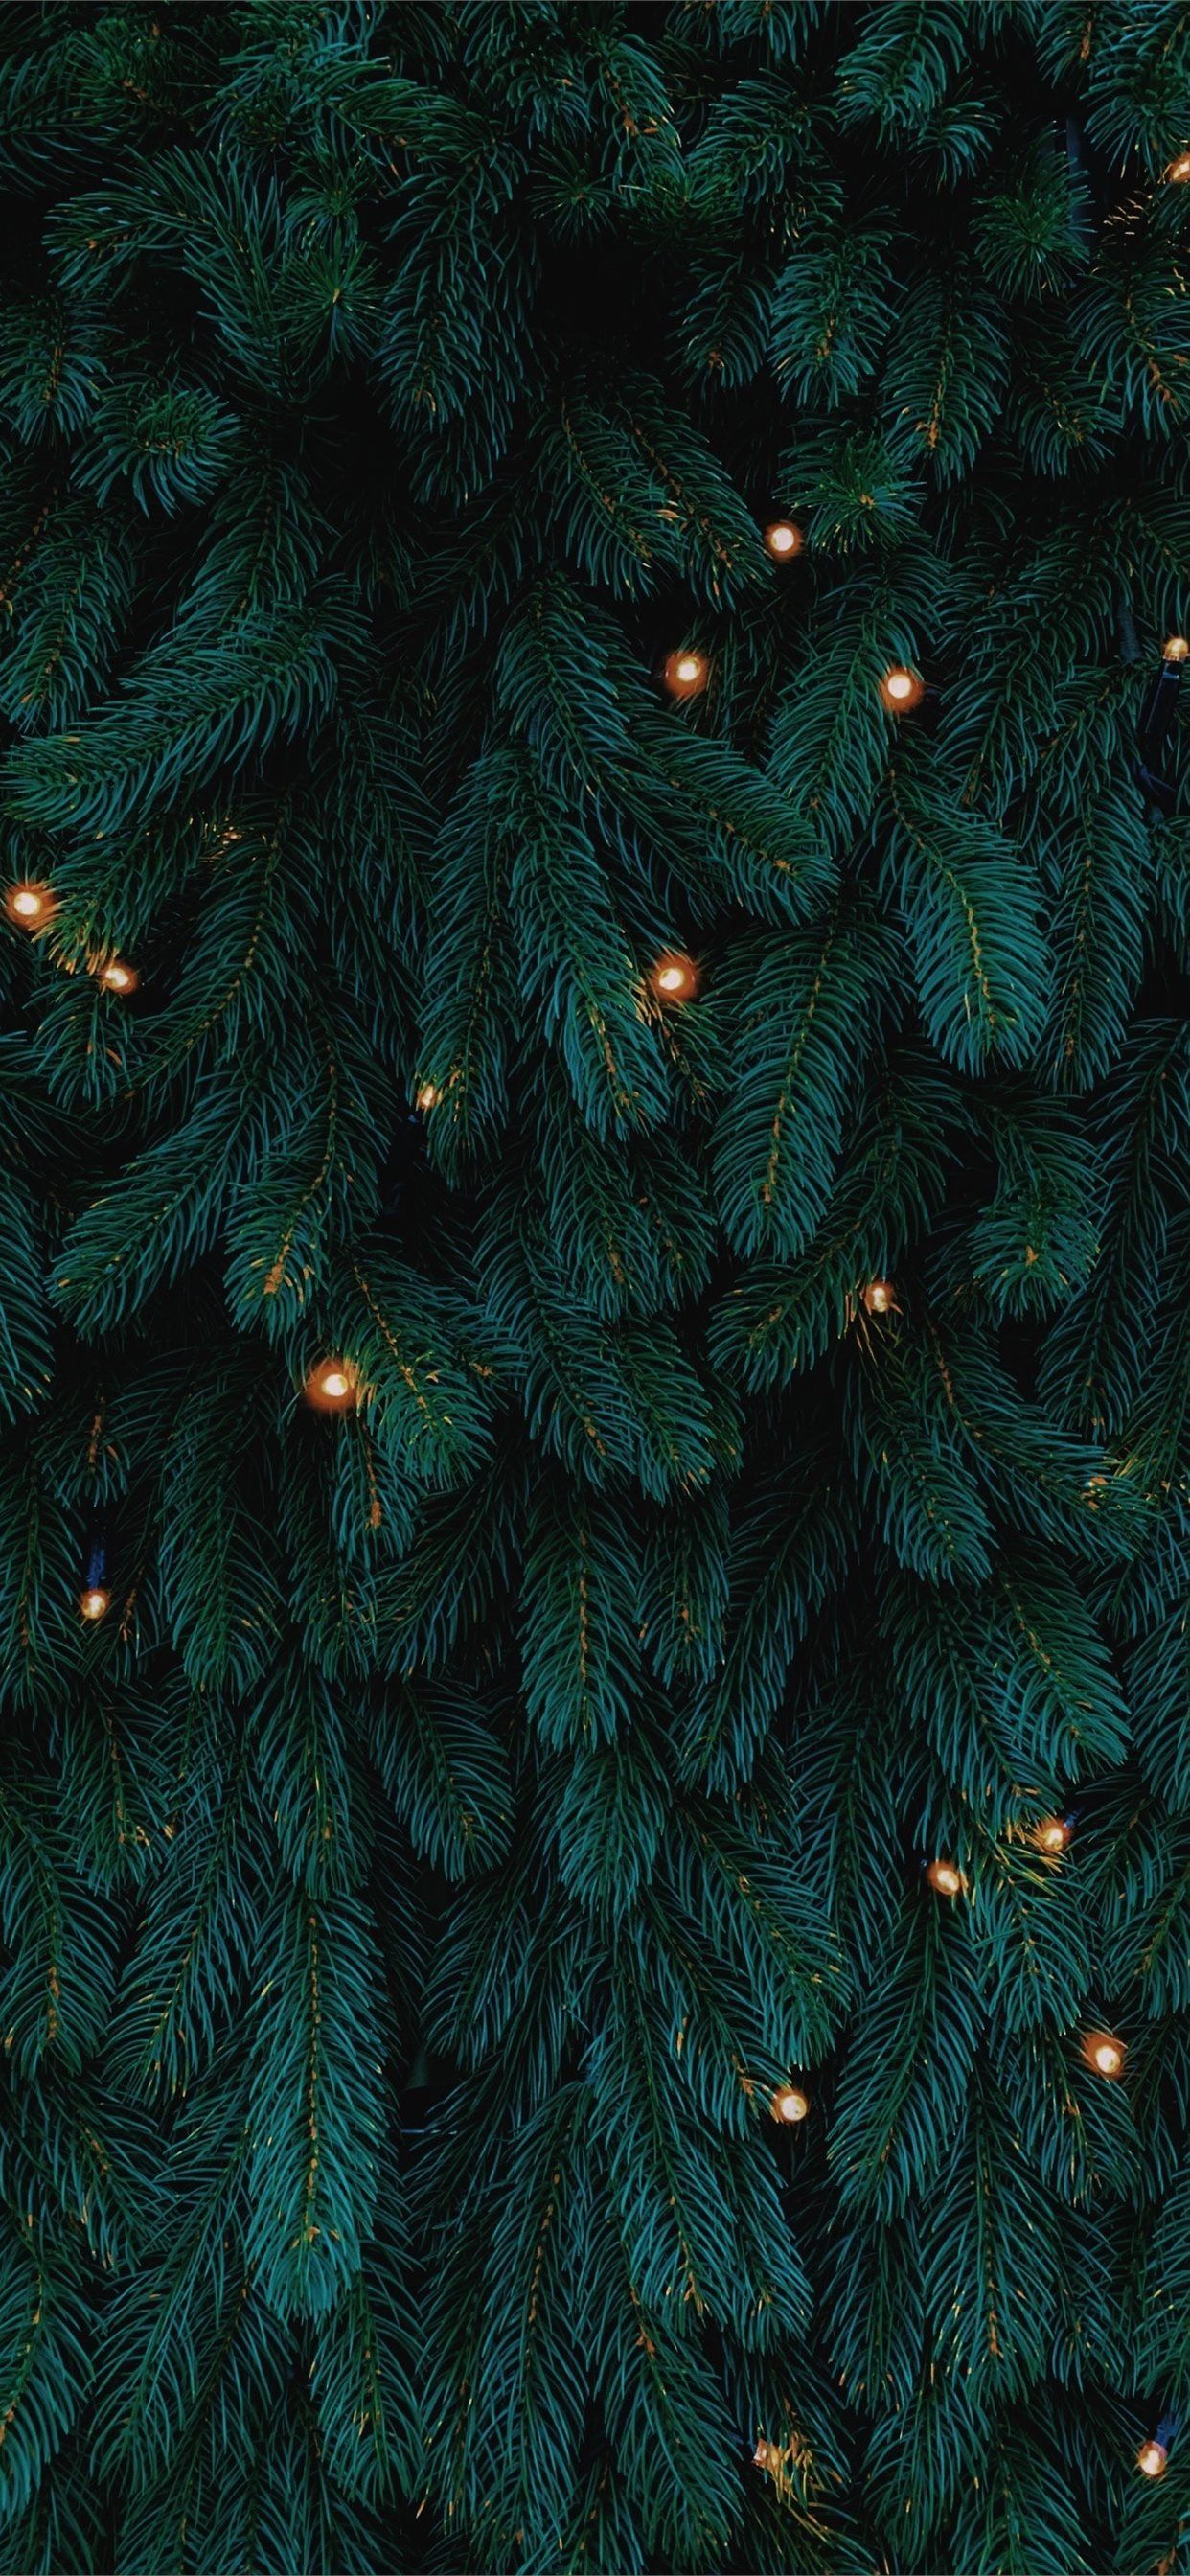 green Christmas tree with lights iPhone X Wallpaper Free Download